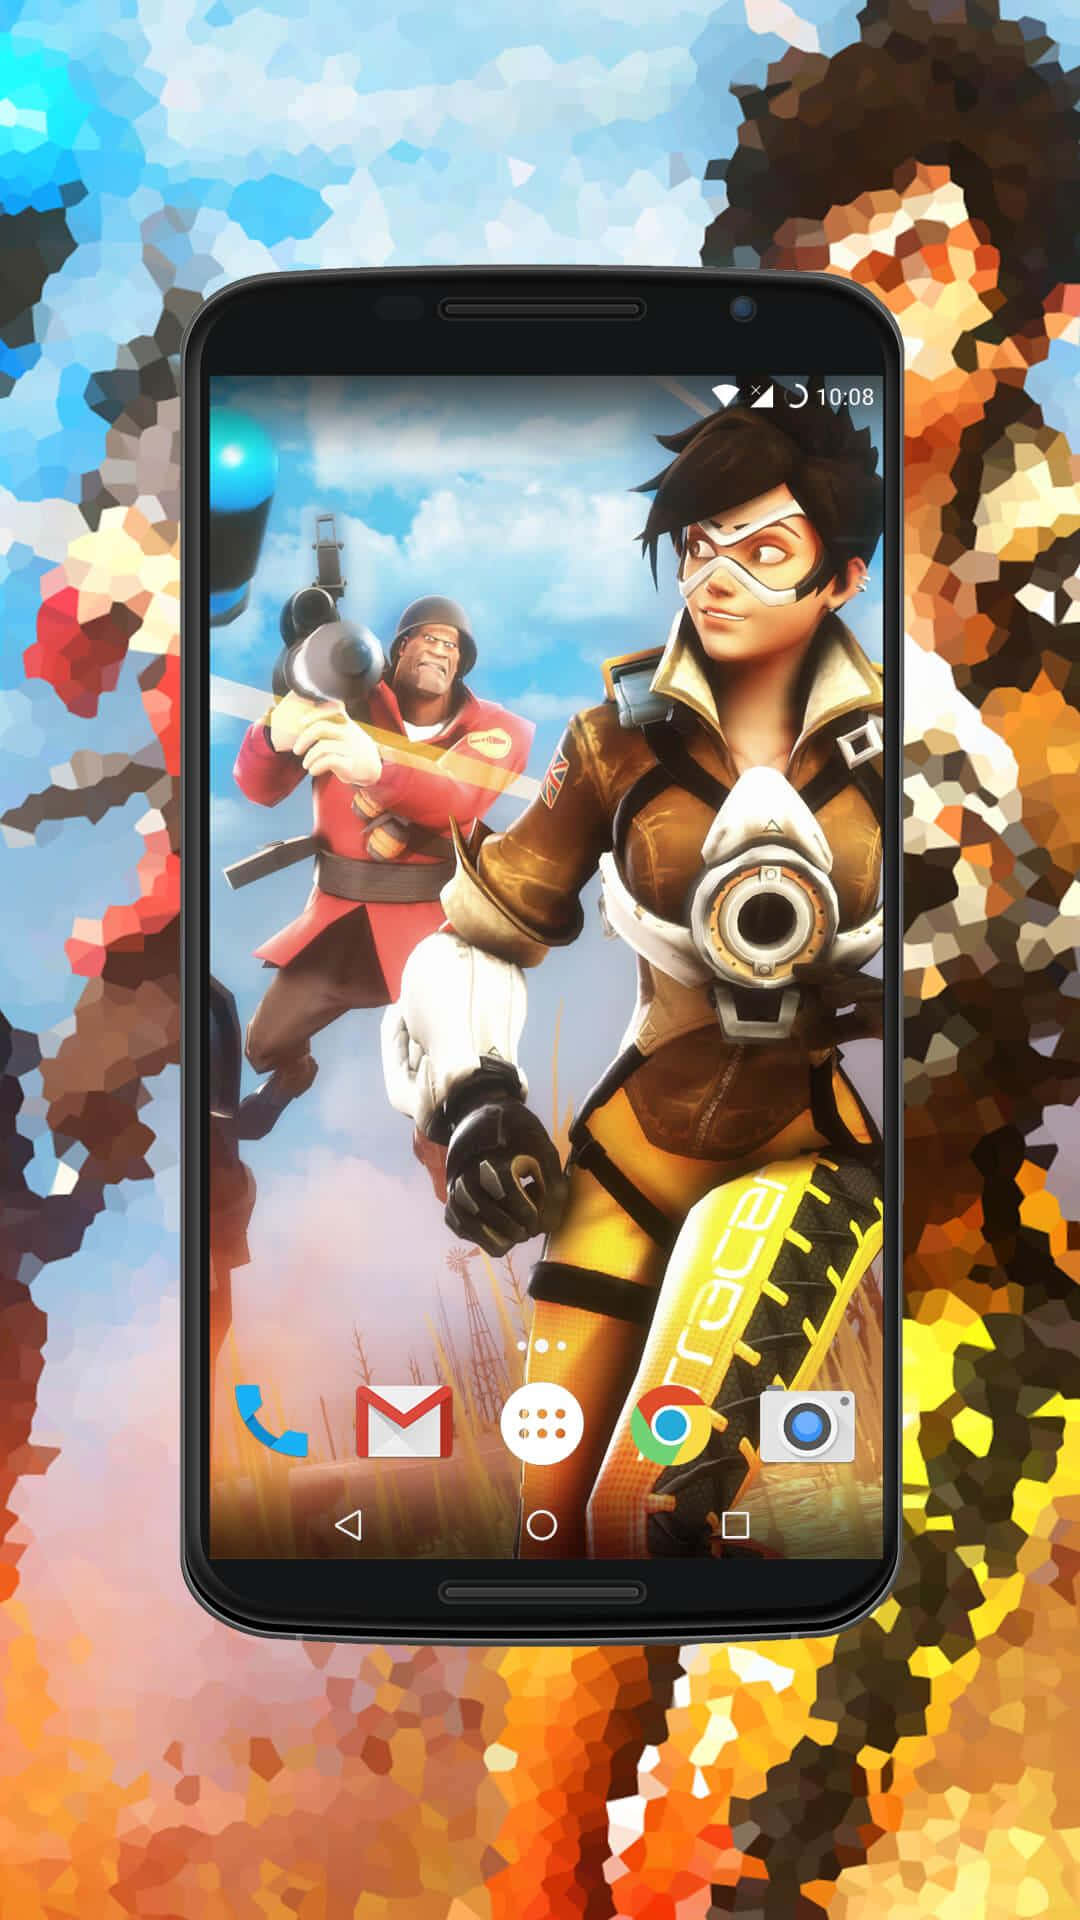 Outmaneuver your opponents in Team Fortress 2 on the Pixel 3xl